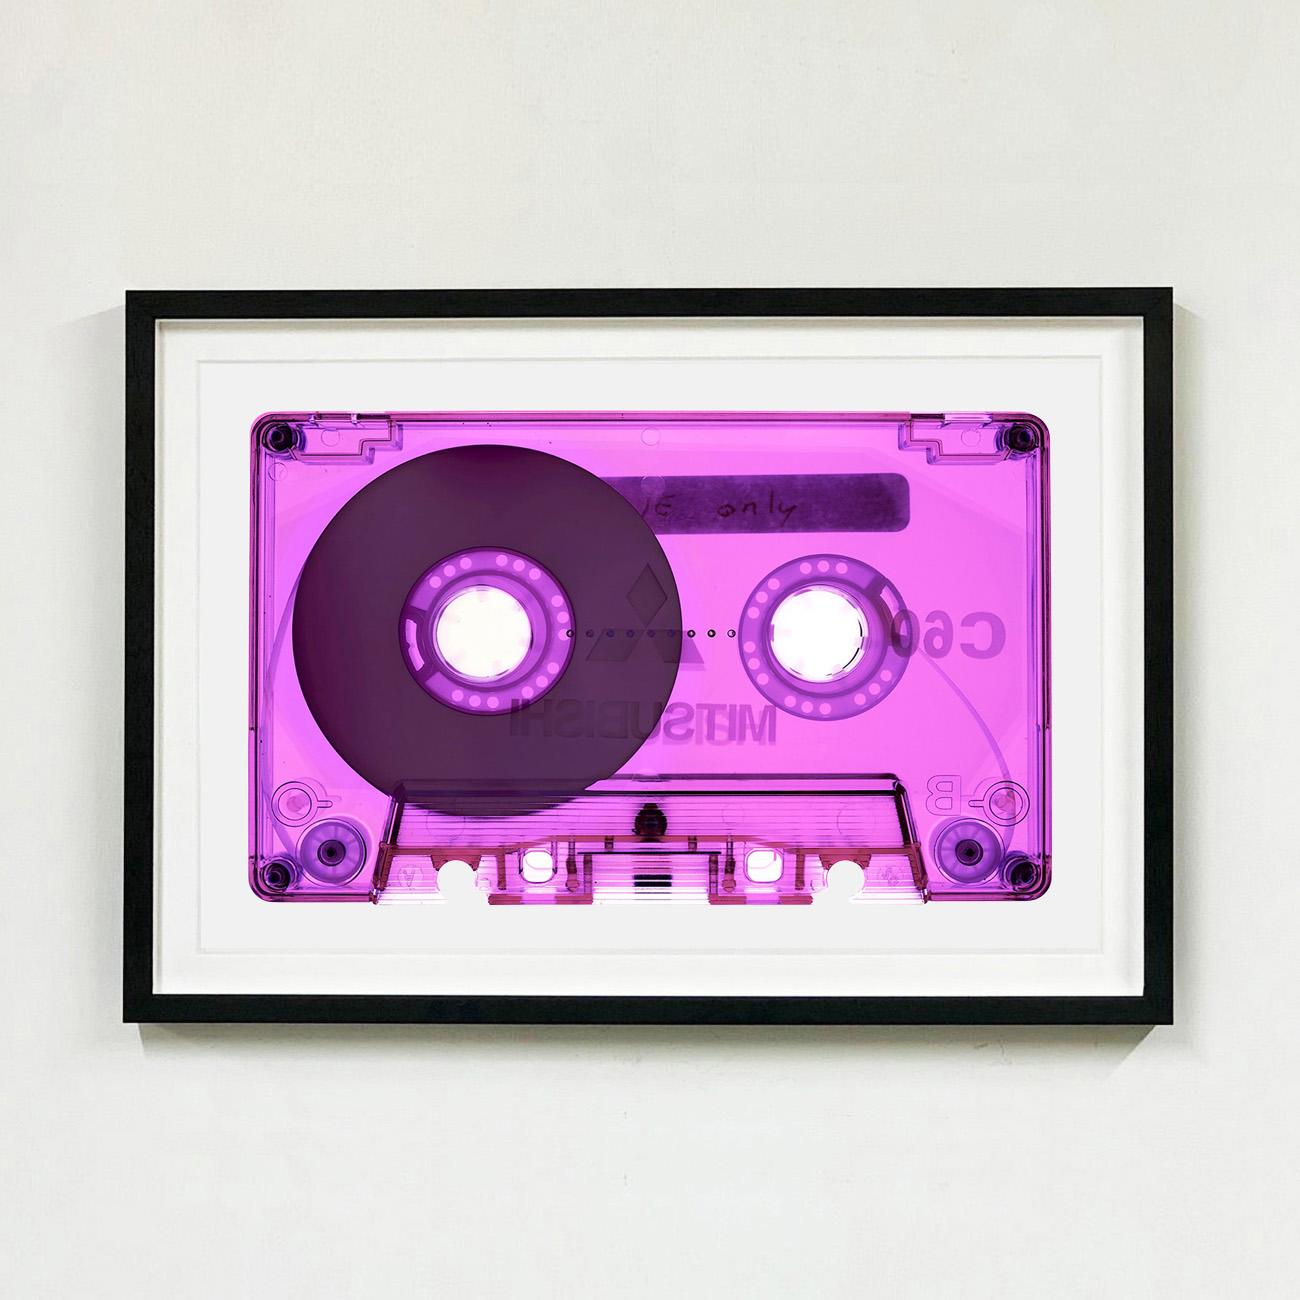 Tape Collection B Side Set of Three Medium Framed Pop Art Color Photography - Gray Still-Life Photograph by Heidler & Heeps